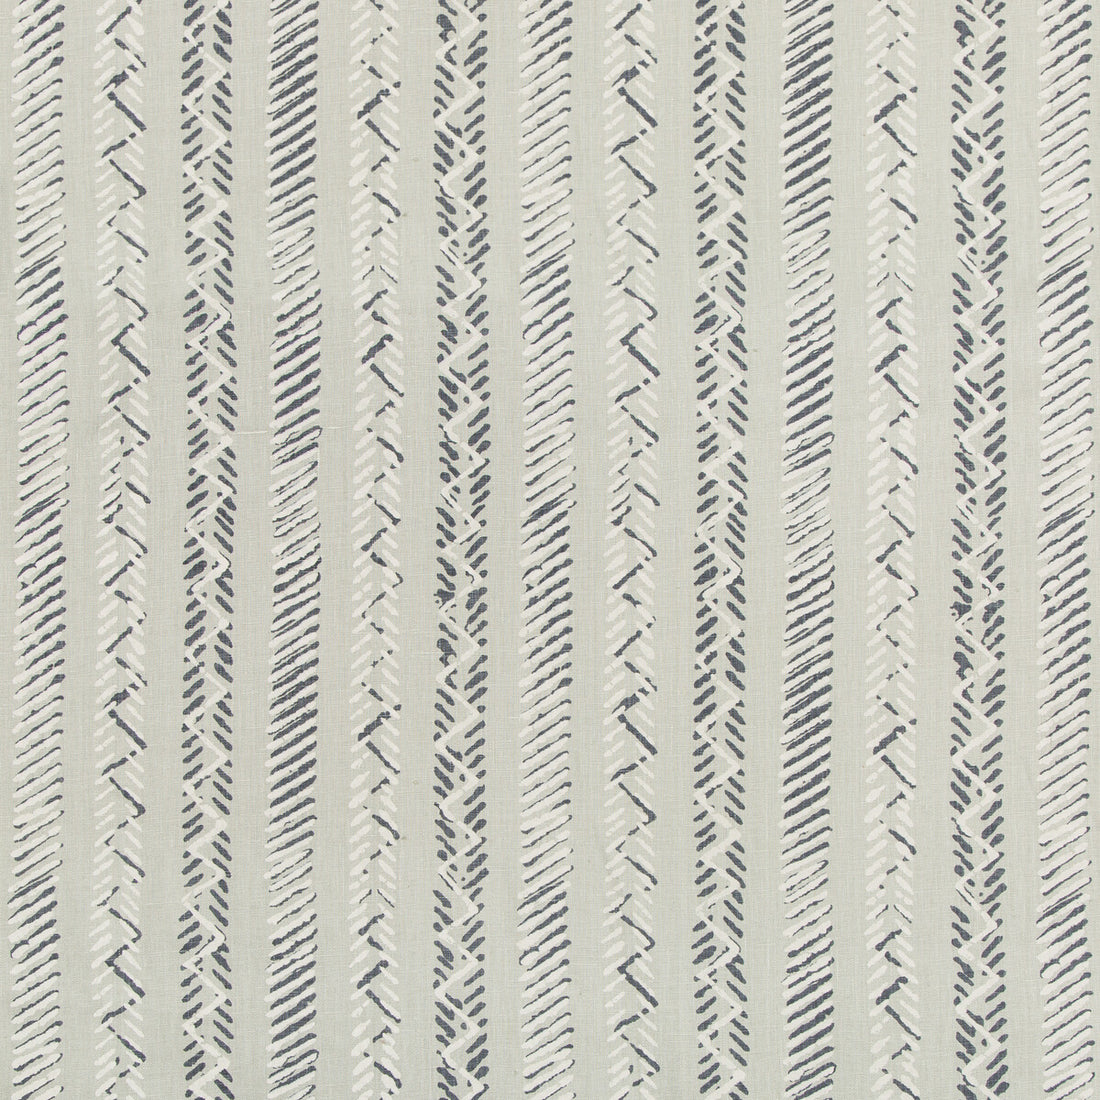 Tintlines fabric in cloud color - pattern TINTLINES.511.0 - by Kravet Design in the Barclay Butera Sagamore collection